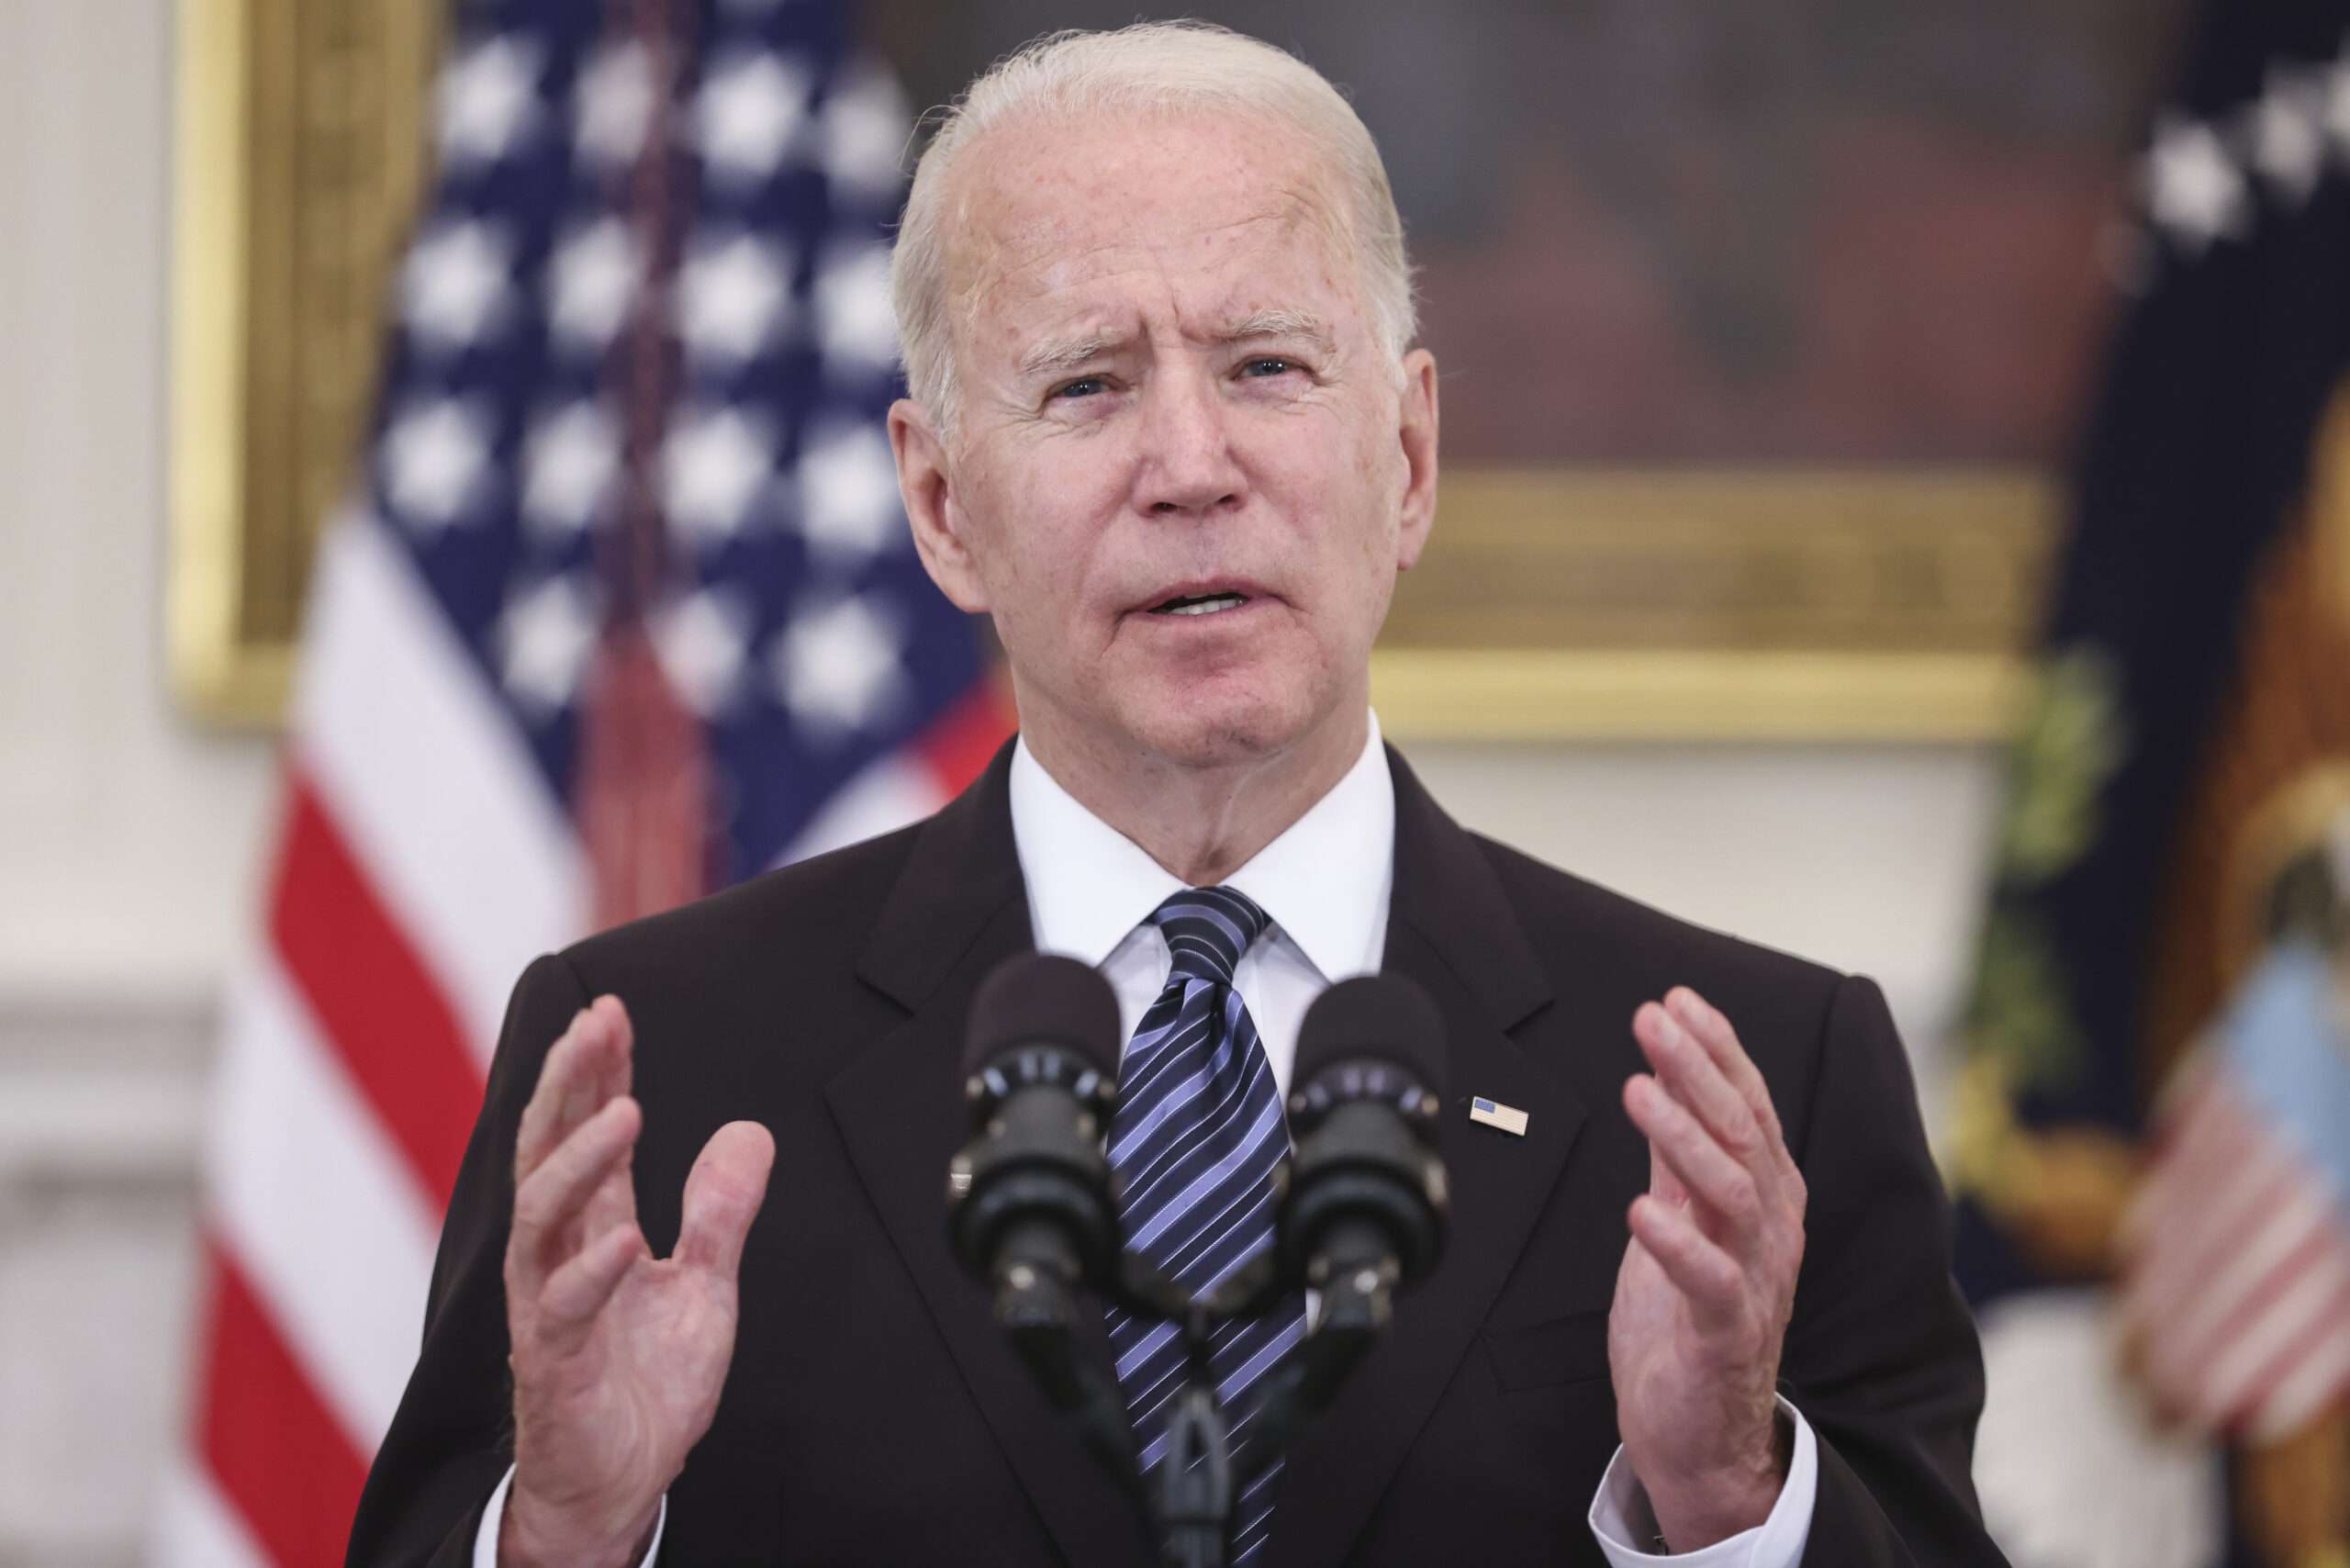 Biden Tells States To Use COVID-19 Relief Funds To Hire Cops